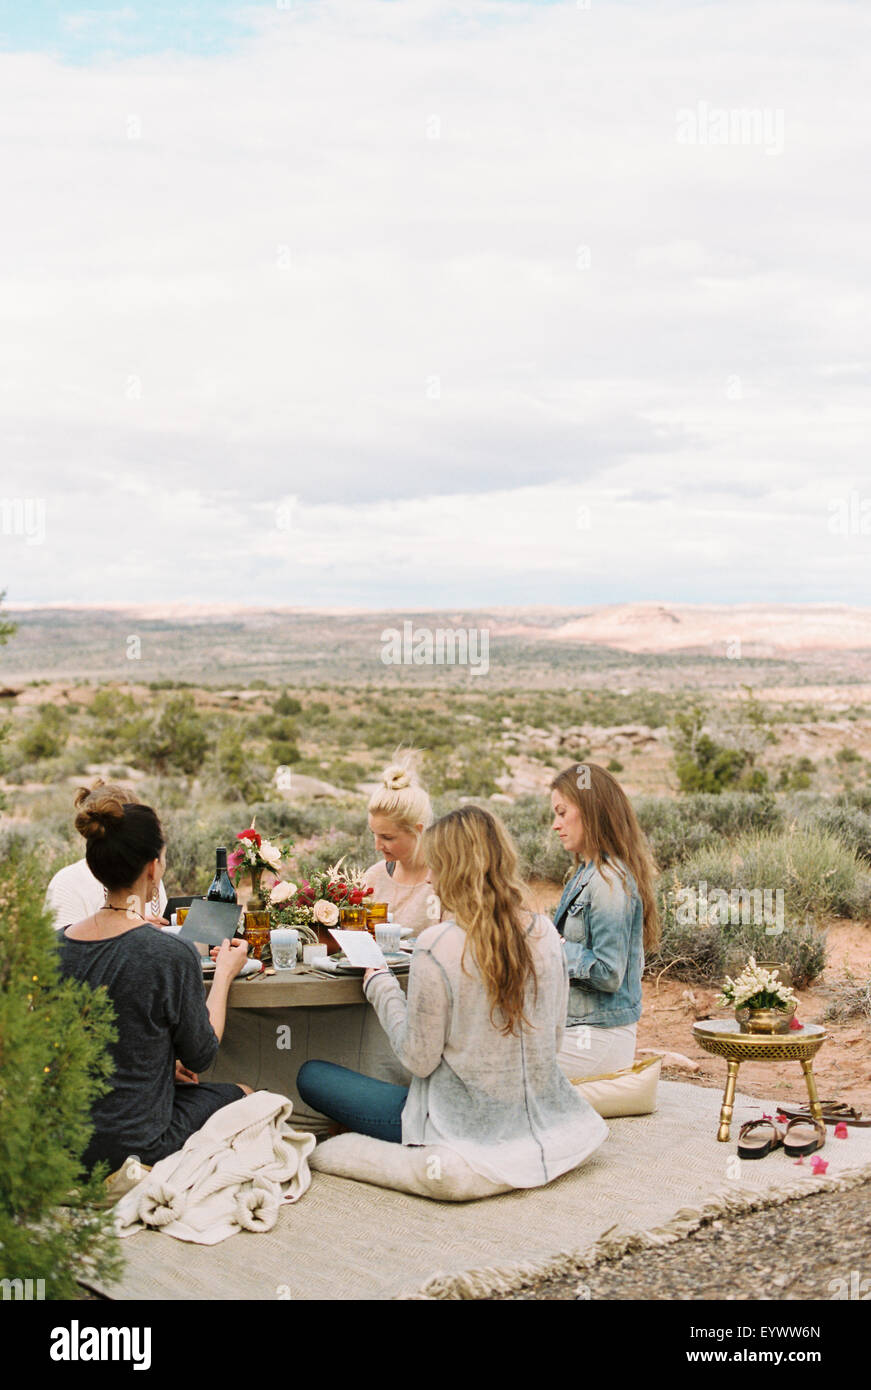 A group of women, friends sitting on the ground round a table in the open desert. Stock Photo